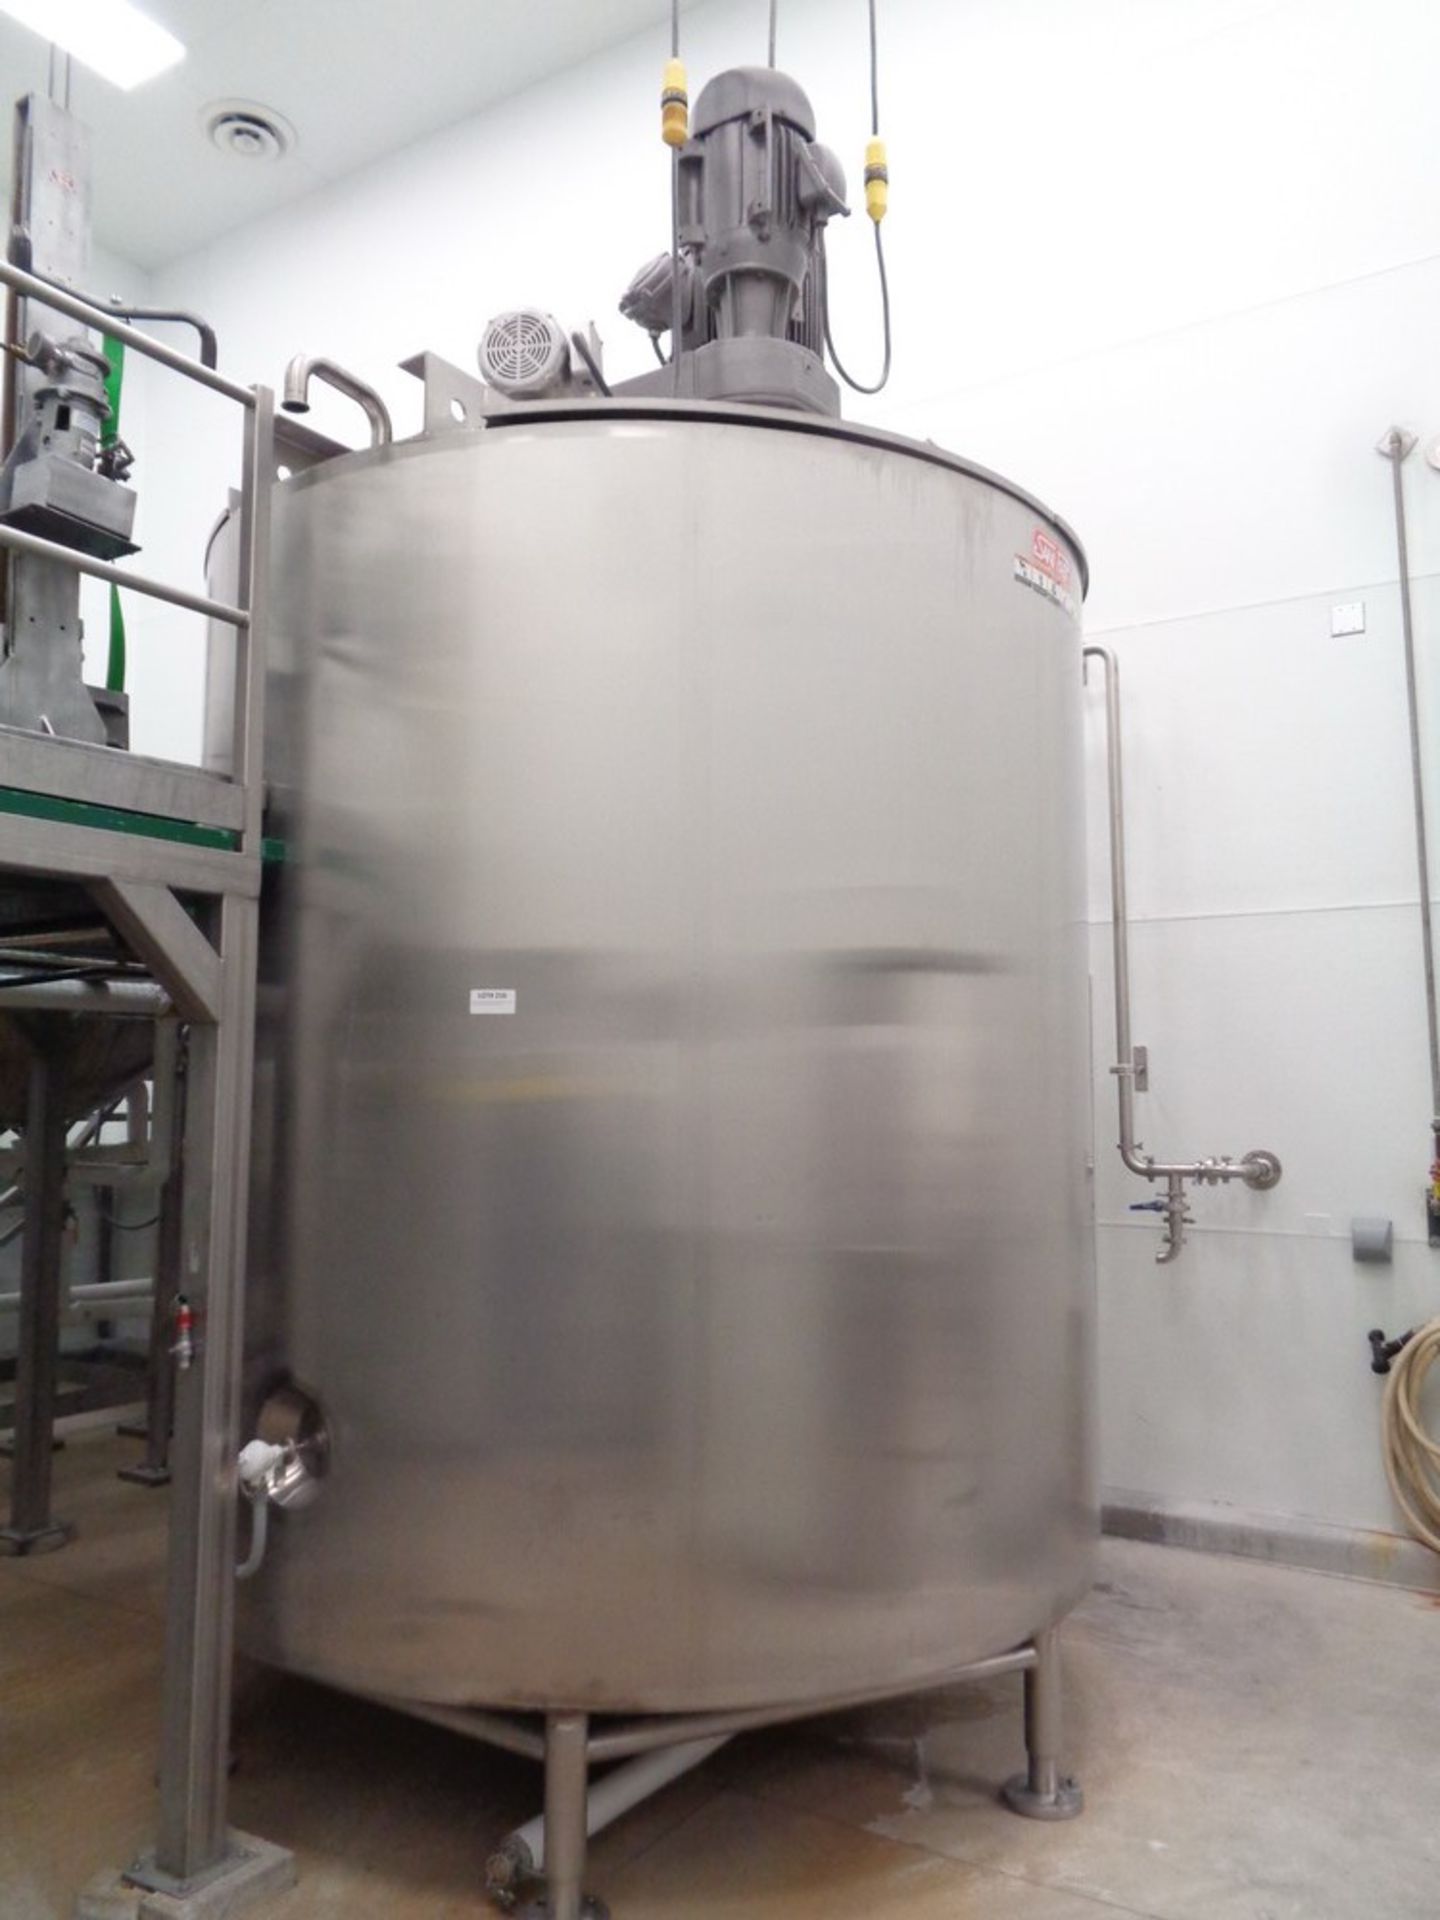 SANI FAB 3,000 GAL TRIPLE MOTION JACKETED VERTICAL SS PROCESSING TANK (MIK-8), S/N G1352301 - Image 2 of 16